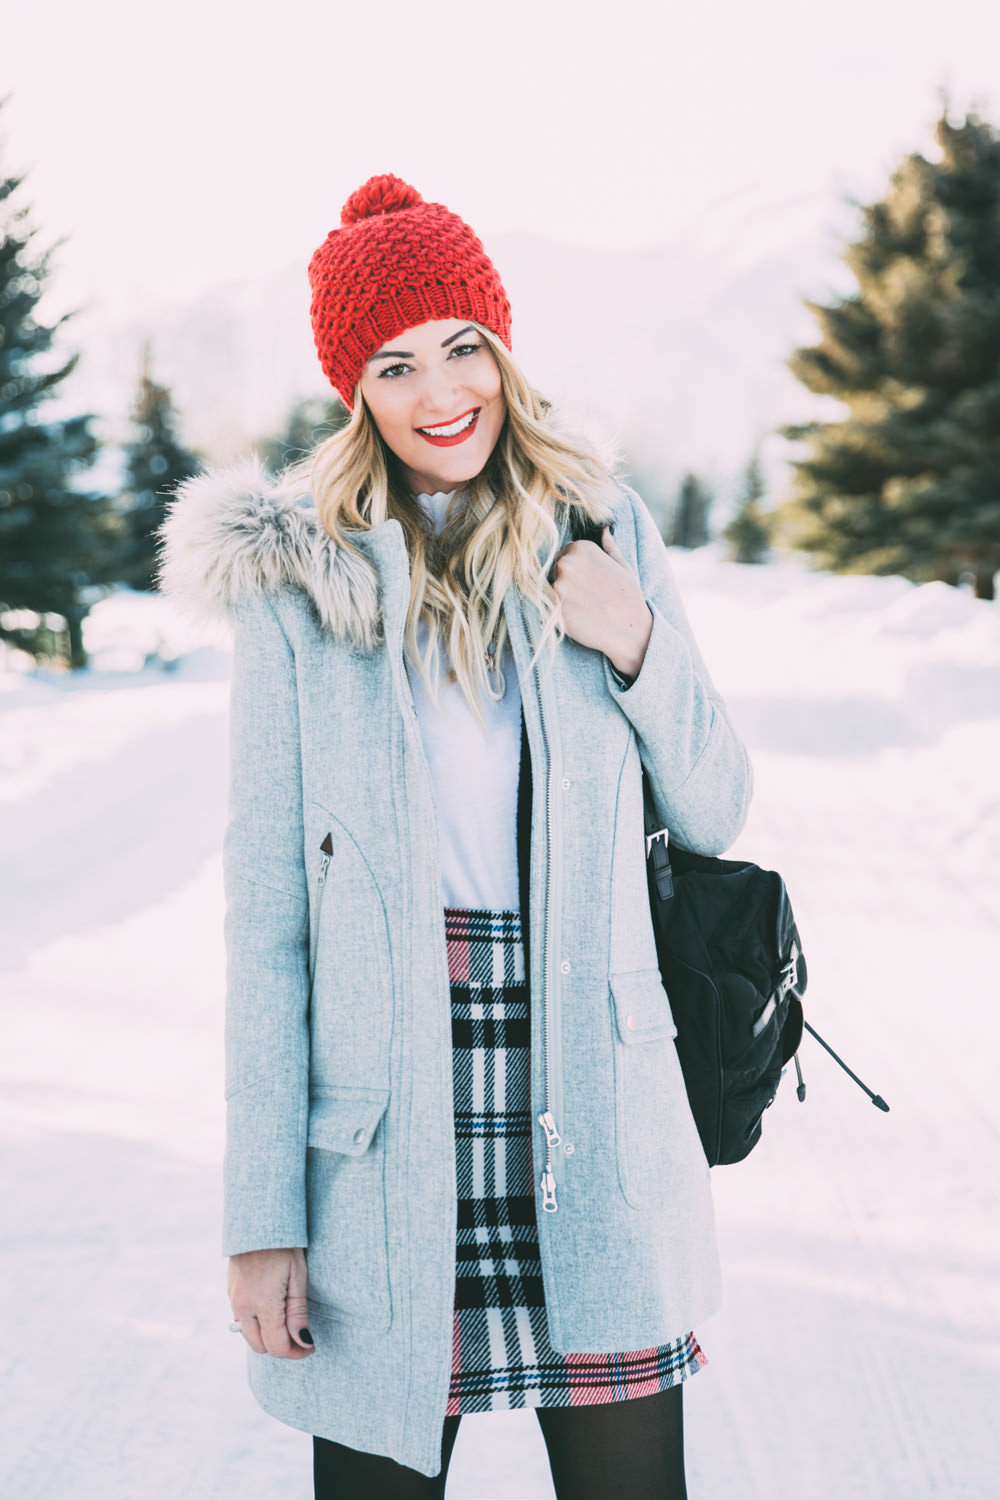 Caitlin Lindquist of the travel blog Dash of Darling shares a holiday winter outfit with Bronzallure in a Topshop plaid skirt, Club Monaco sweater and J.Crew fur hood coat.